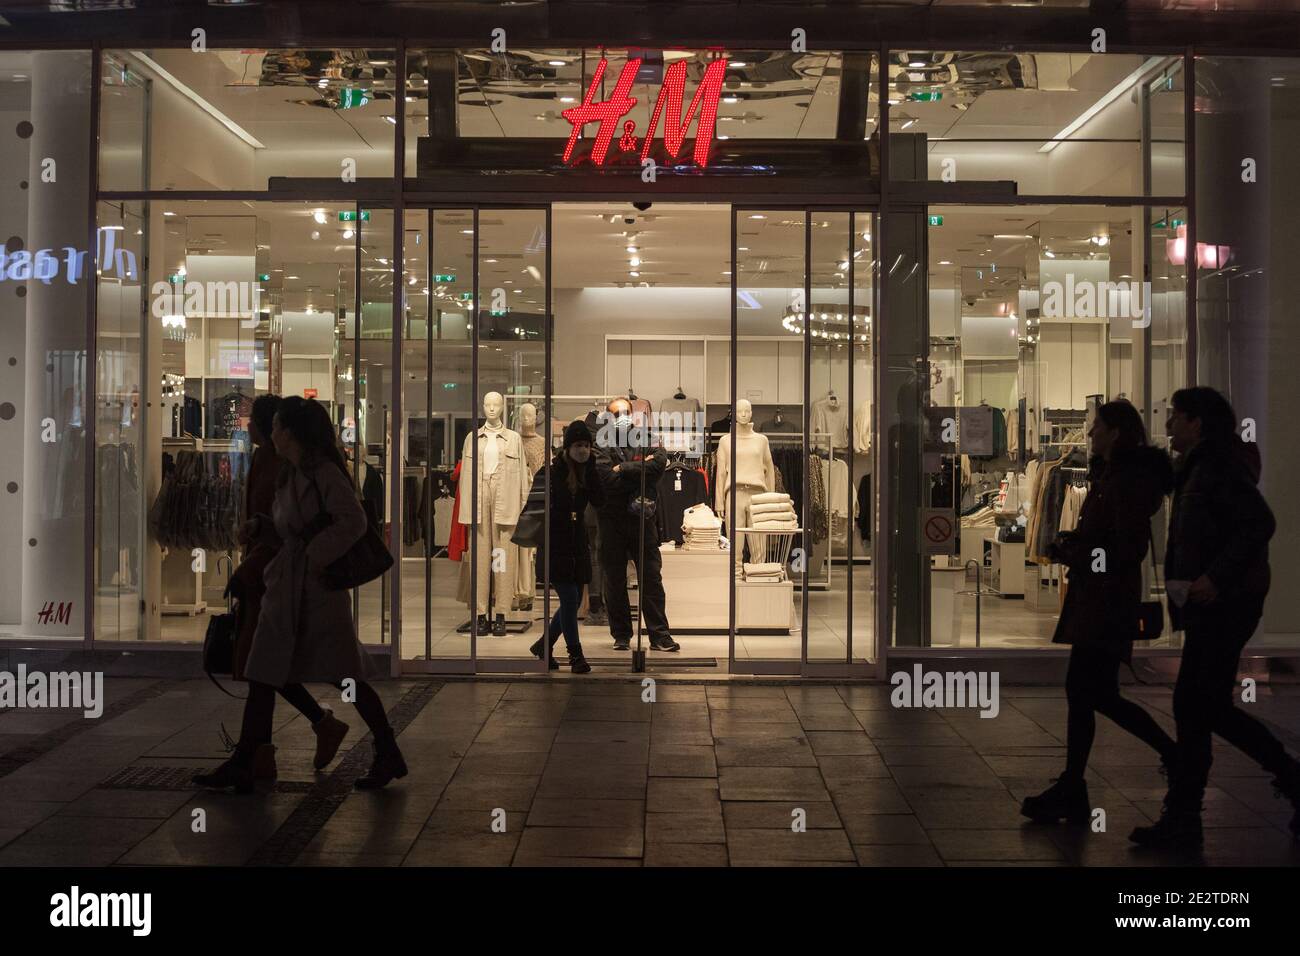 BELGRADE, SERBIA - DECEMBER 21, 2020: Security guard, Staff worker employee  observing clients going out of a H&M fashion retailer clothing shop wearin  Stock Photo - Alamy